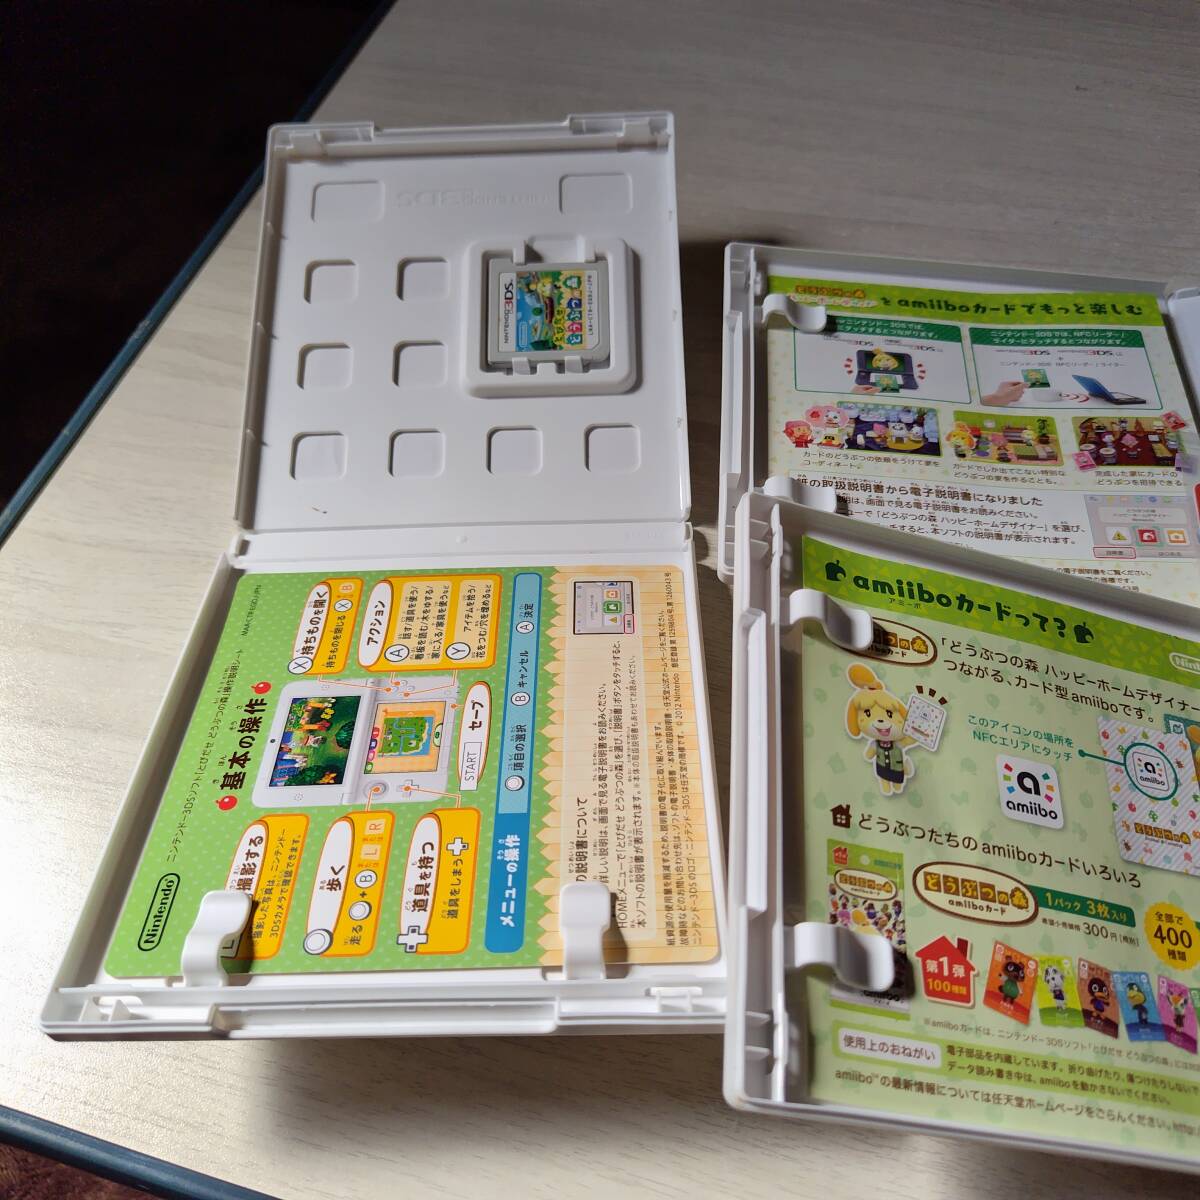 *3DS jump .. Animal Crossing 1 pcs Animal Crossing happy Home designer 2 ps unopened card attaching what pcs . including in a package possible *